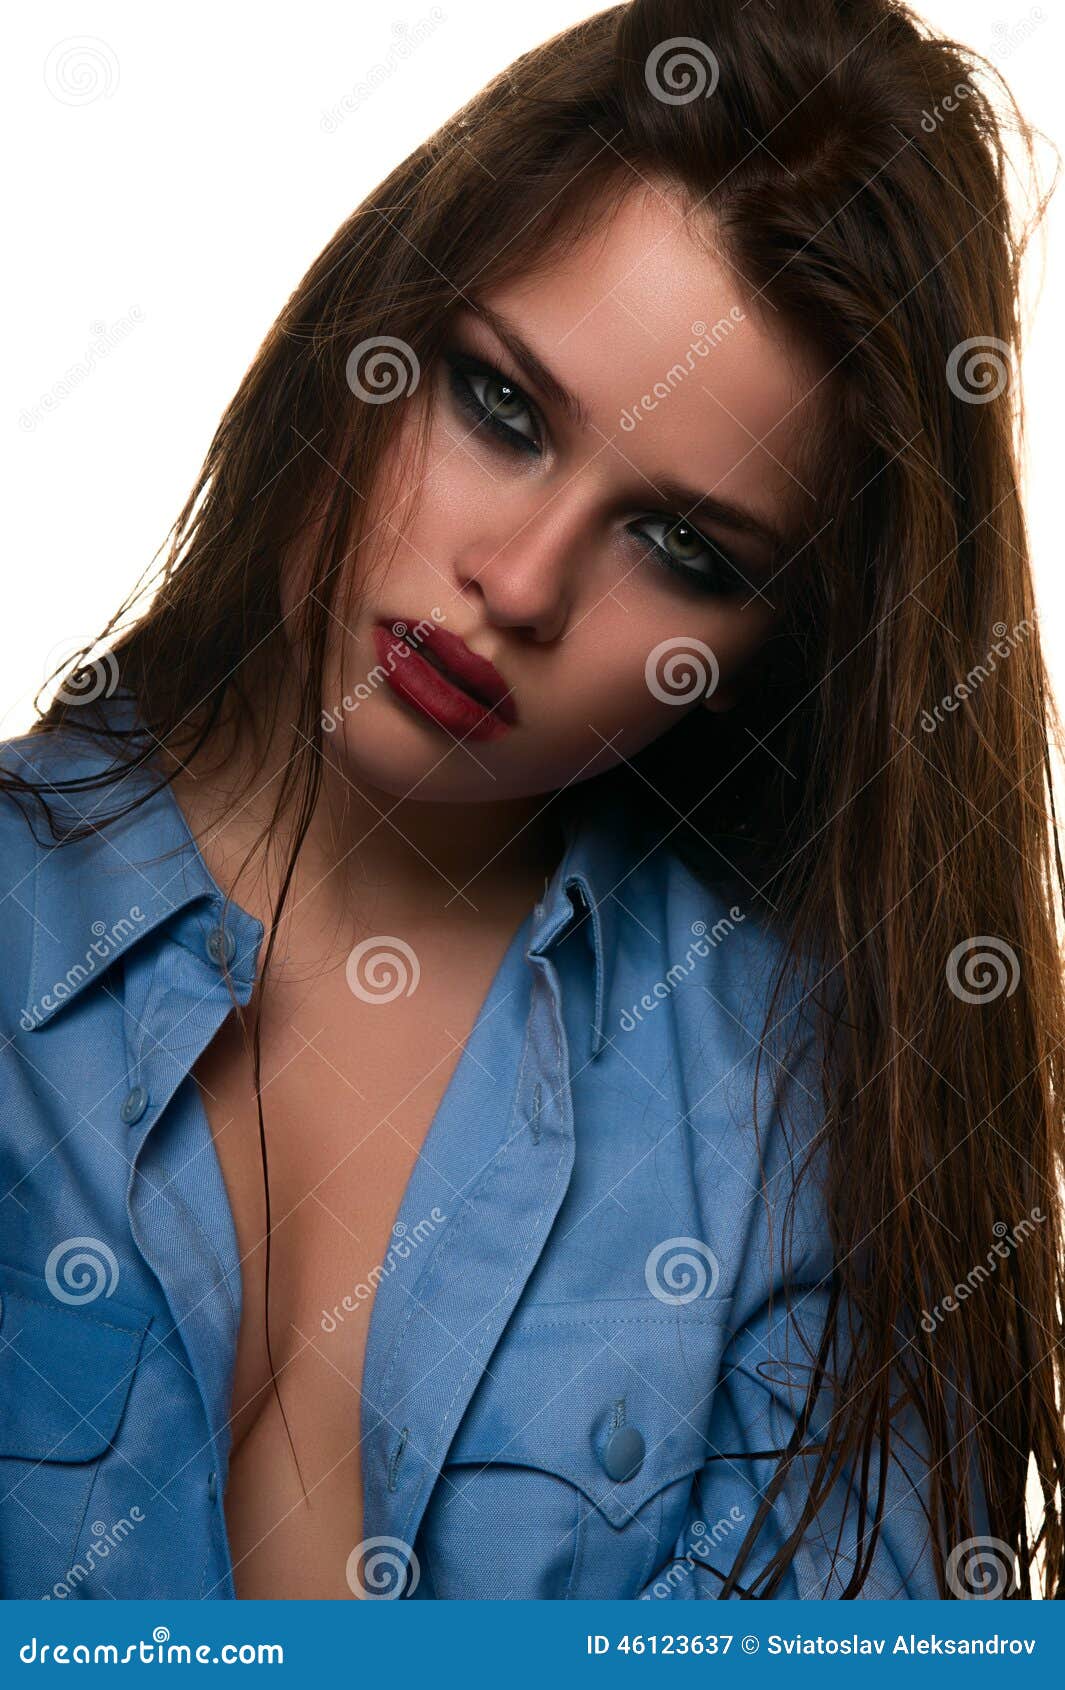 Beauty Female Brunette with Red Lips and Smoky Eyes Stock Image - Image ...